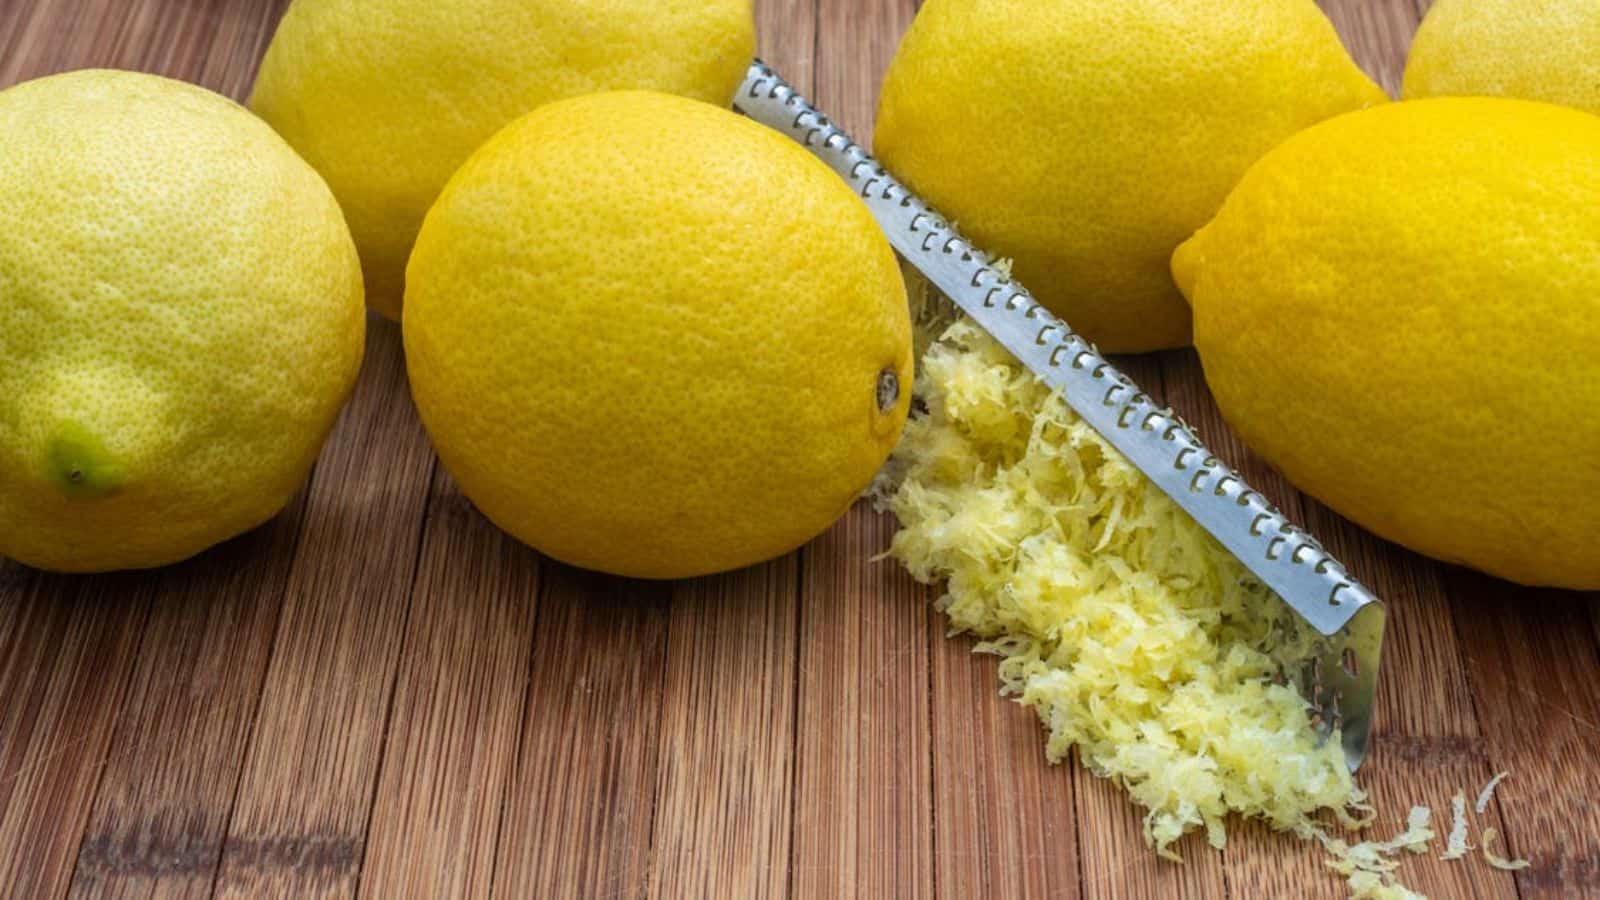 Ripe lemons with zest and grater on table.